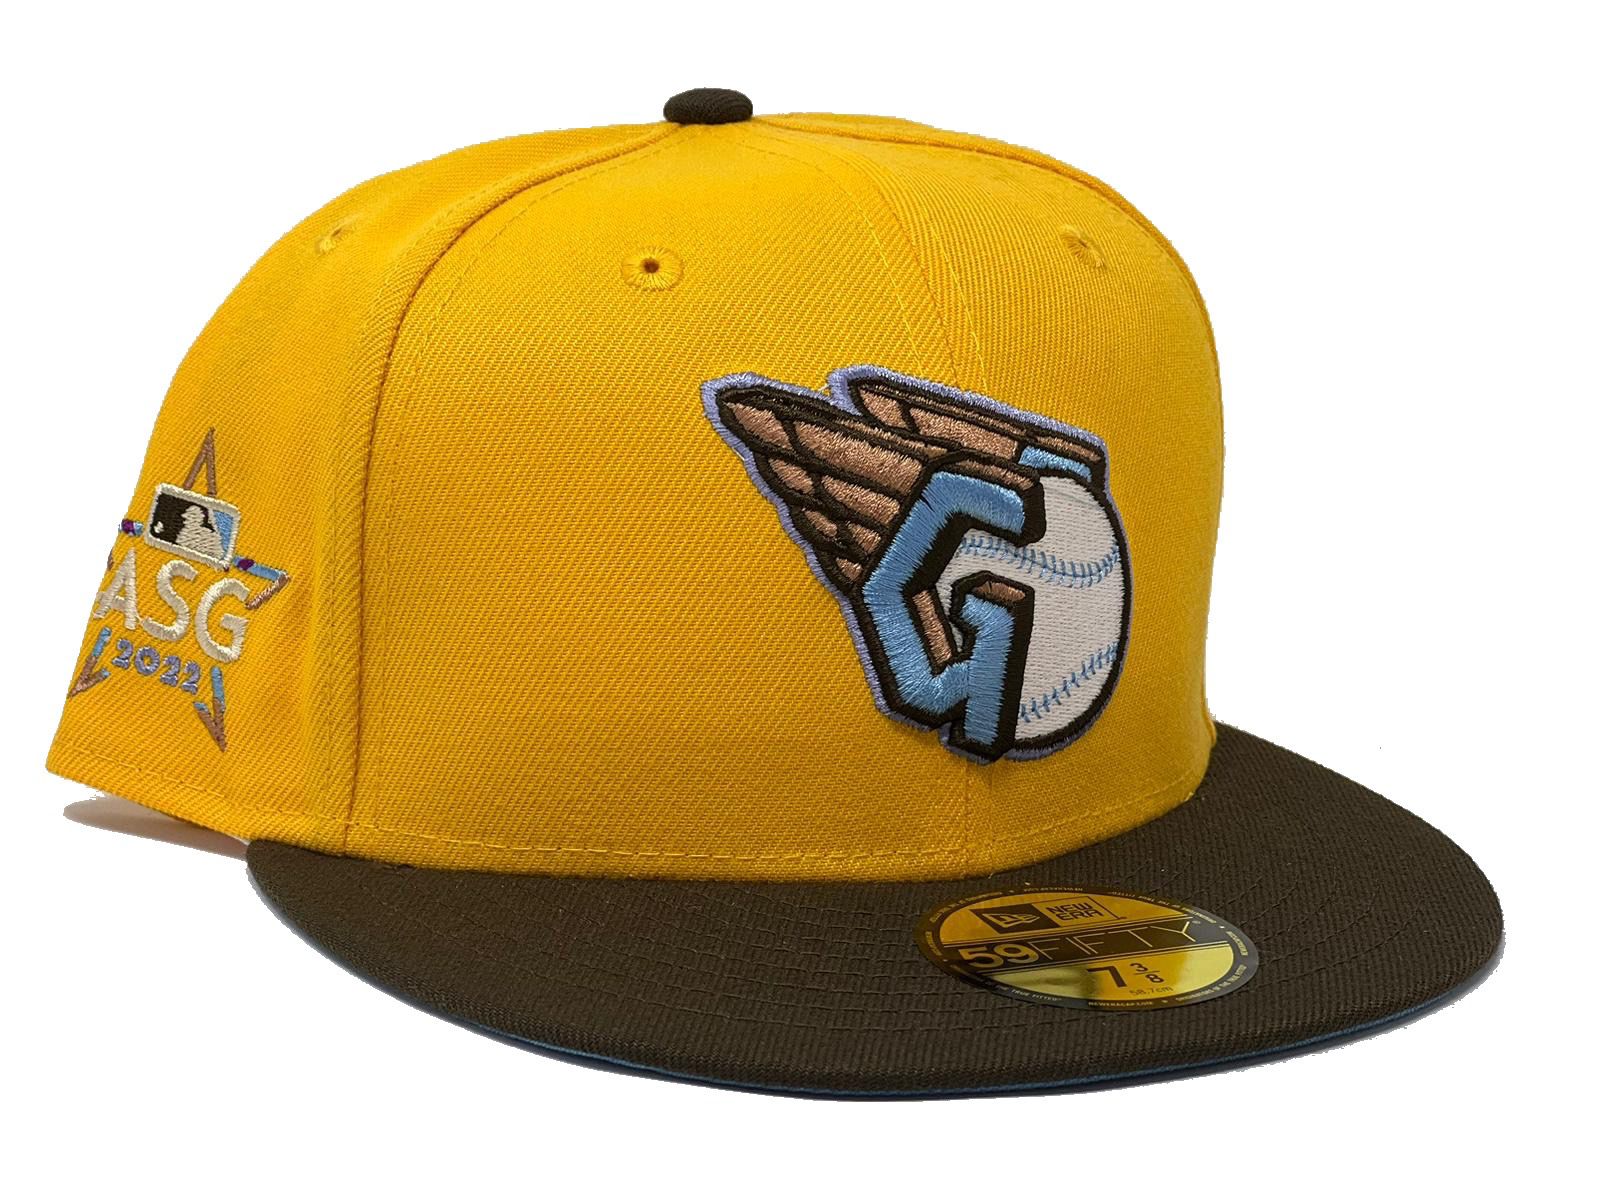 Cleveland Guardians unveil on-field baseball caps for 2022 season 